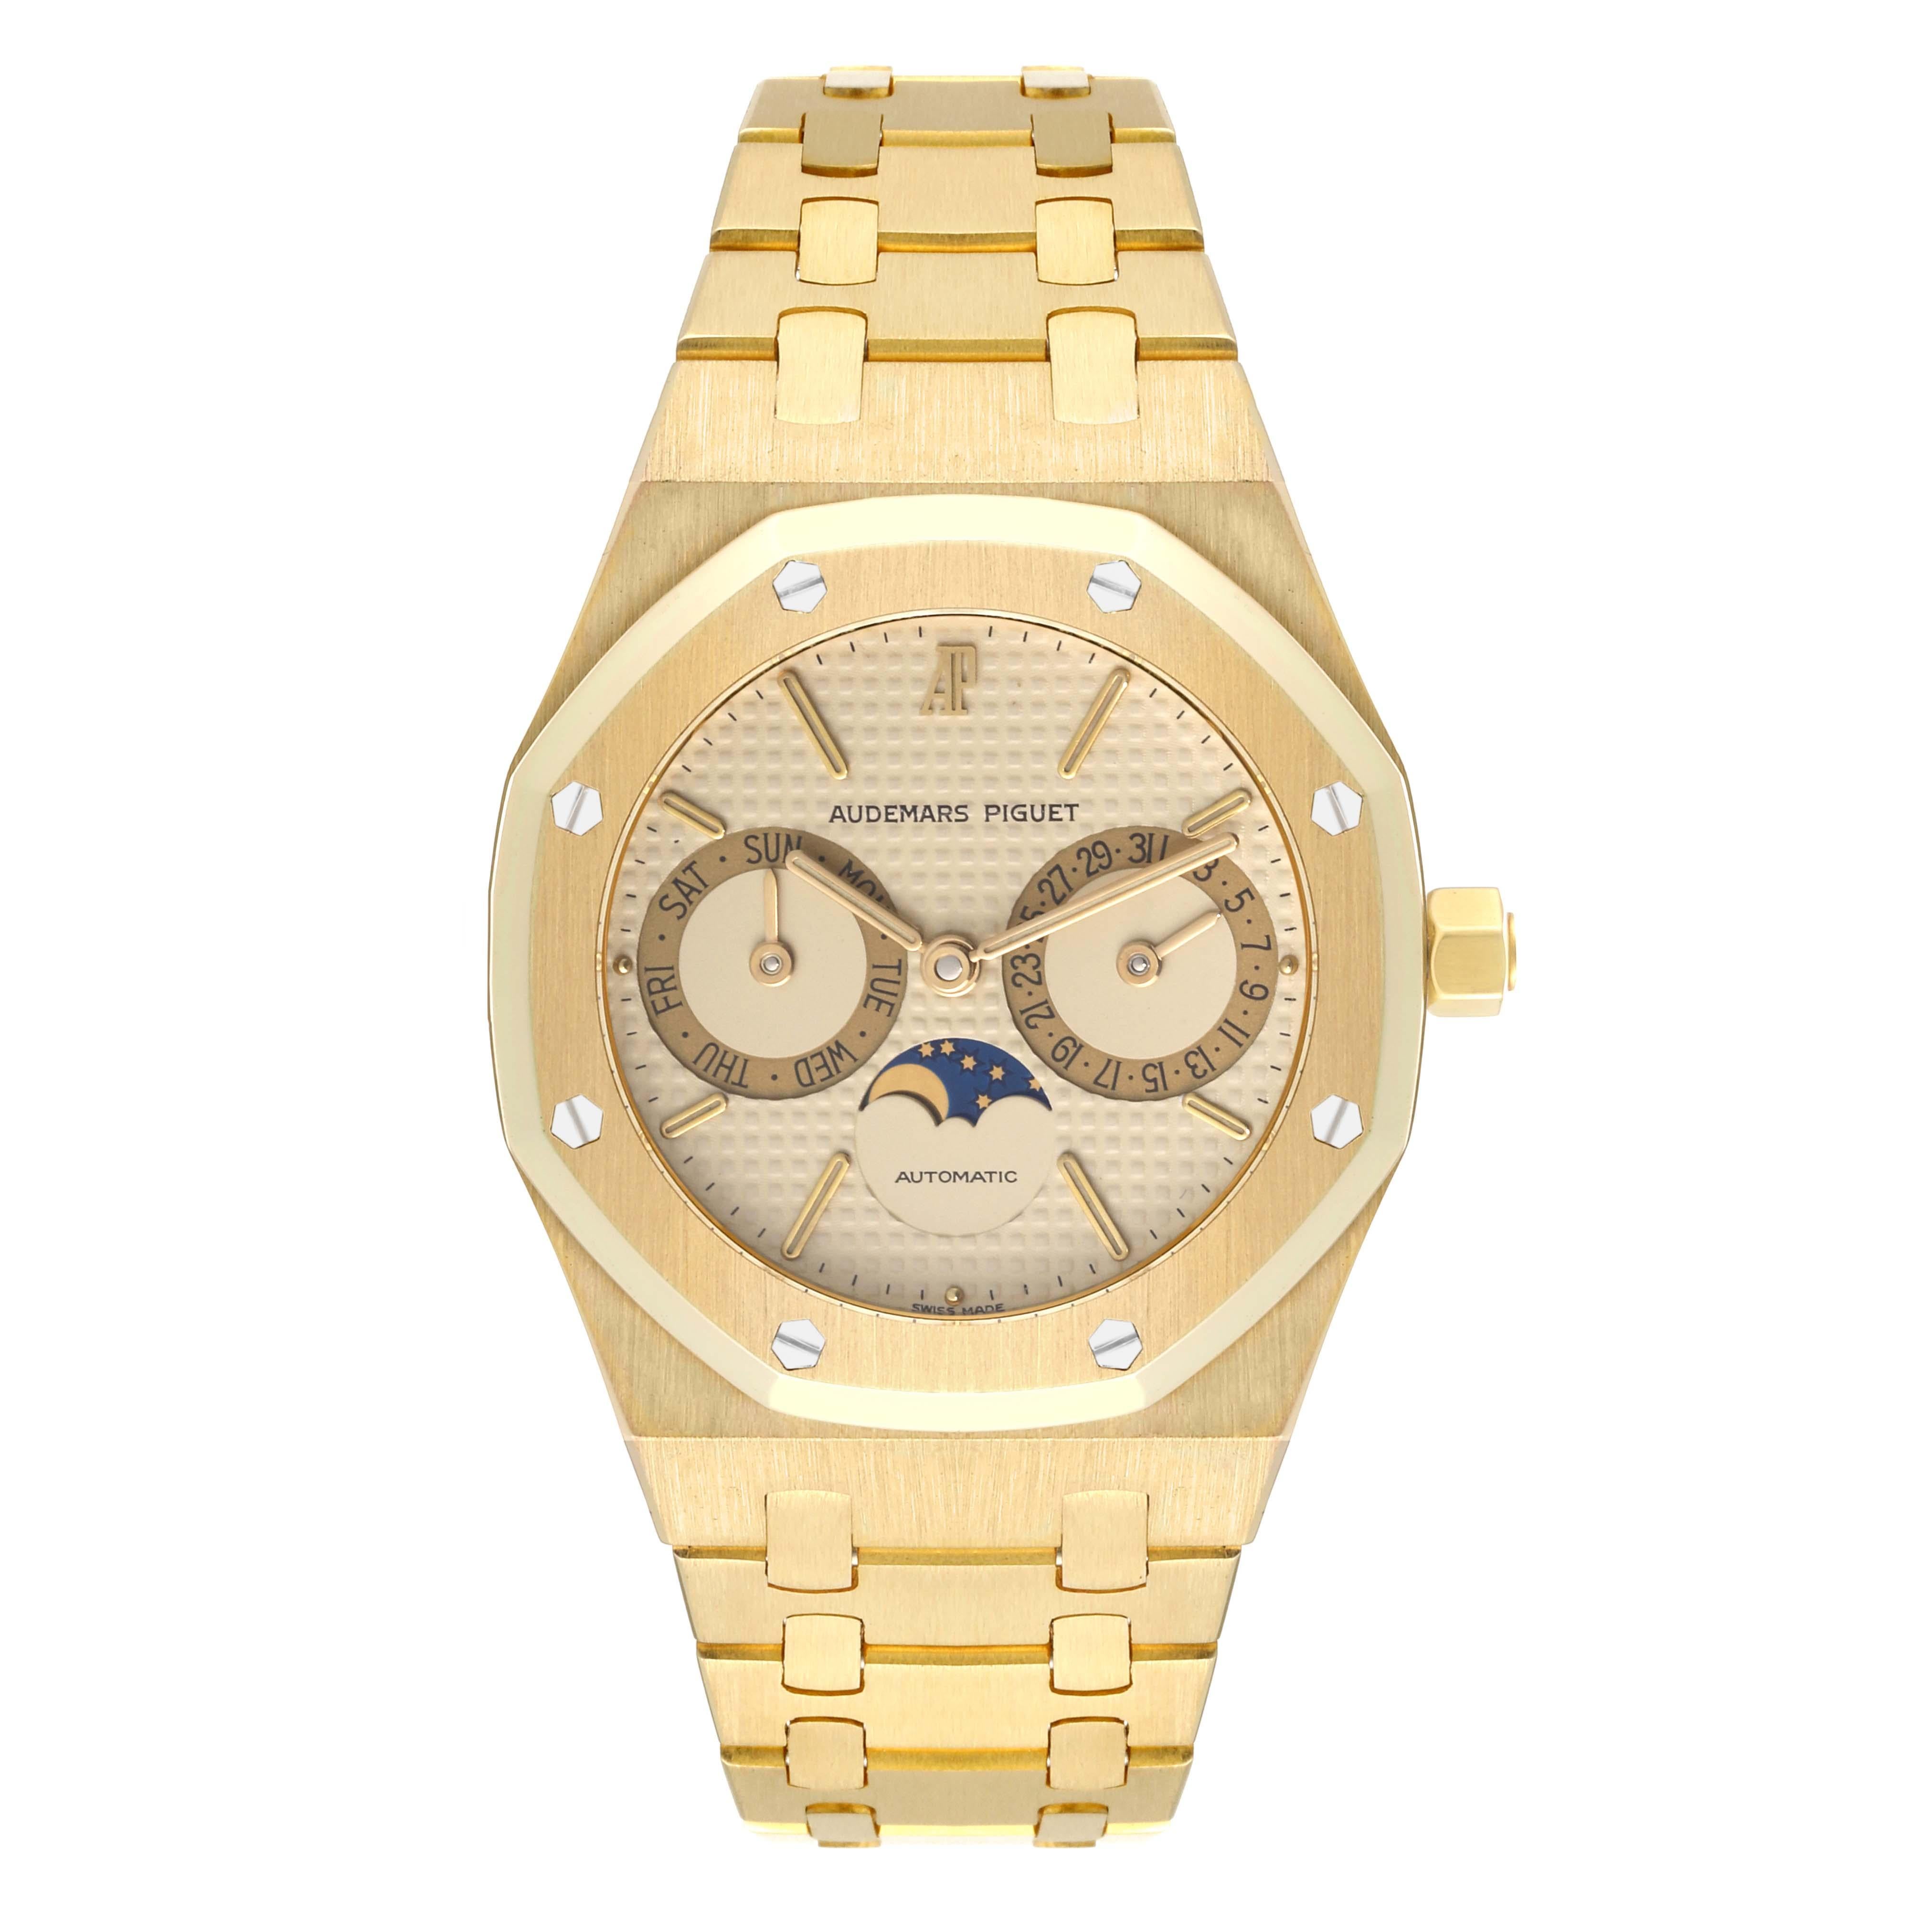 Audemars Piguet Royal Oak Yellow Gold Day Date Moonphase Mens Watch 25594BA. Automatic self-winding movement. 18K yellow gold case 36.0 mm in diameter. 18K yellow gold bezel punctuated with 8 signature screws. Scratch resistant sapphire crystal.